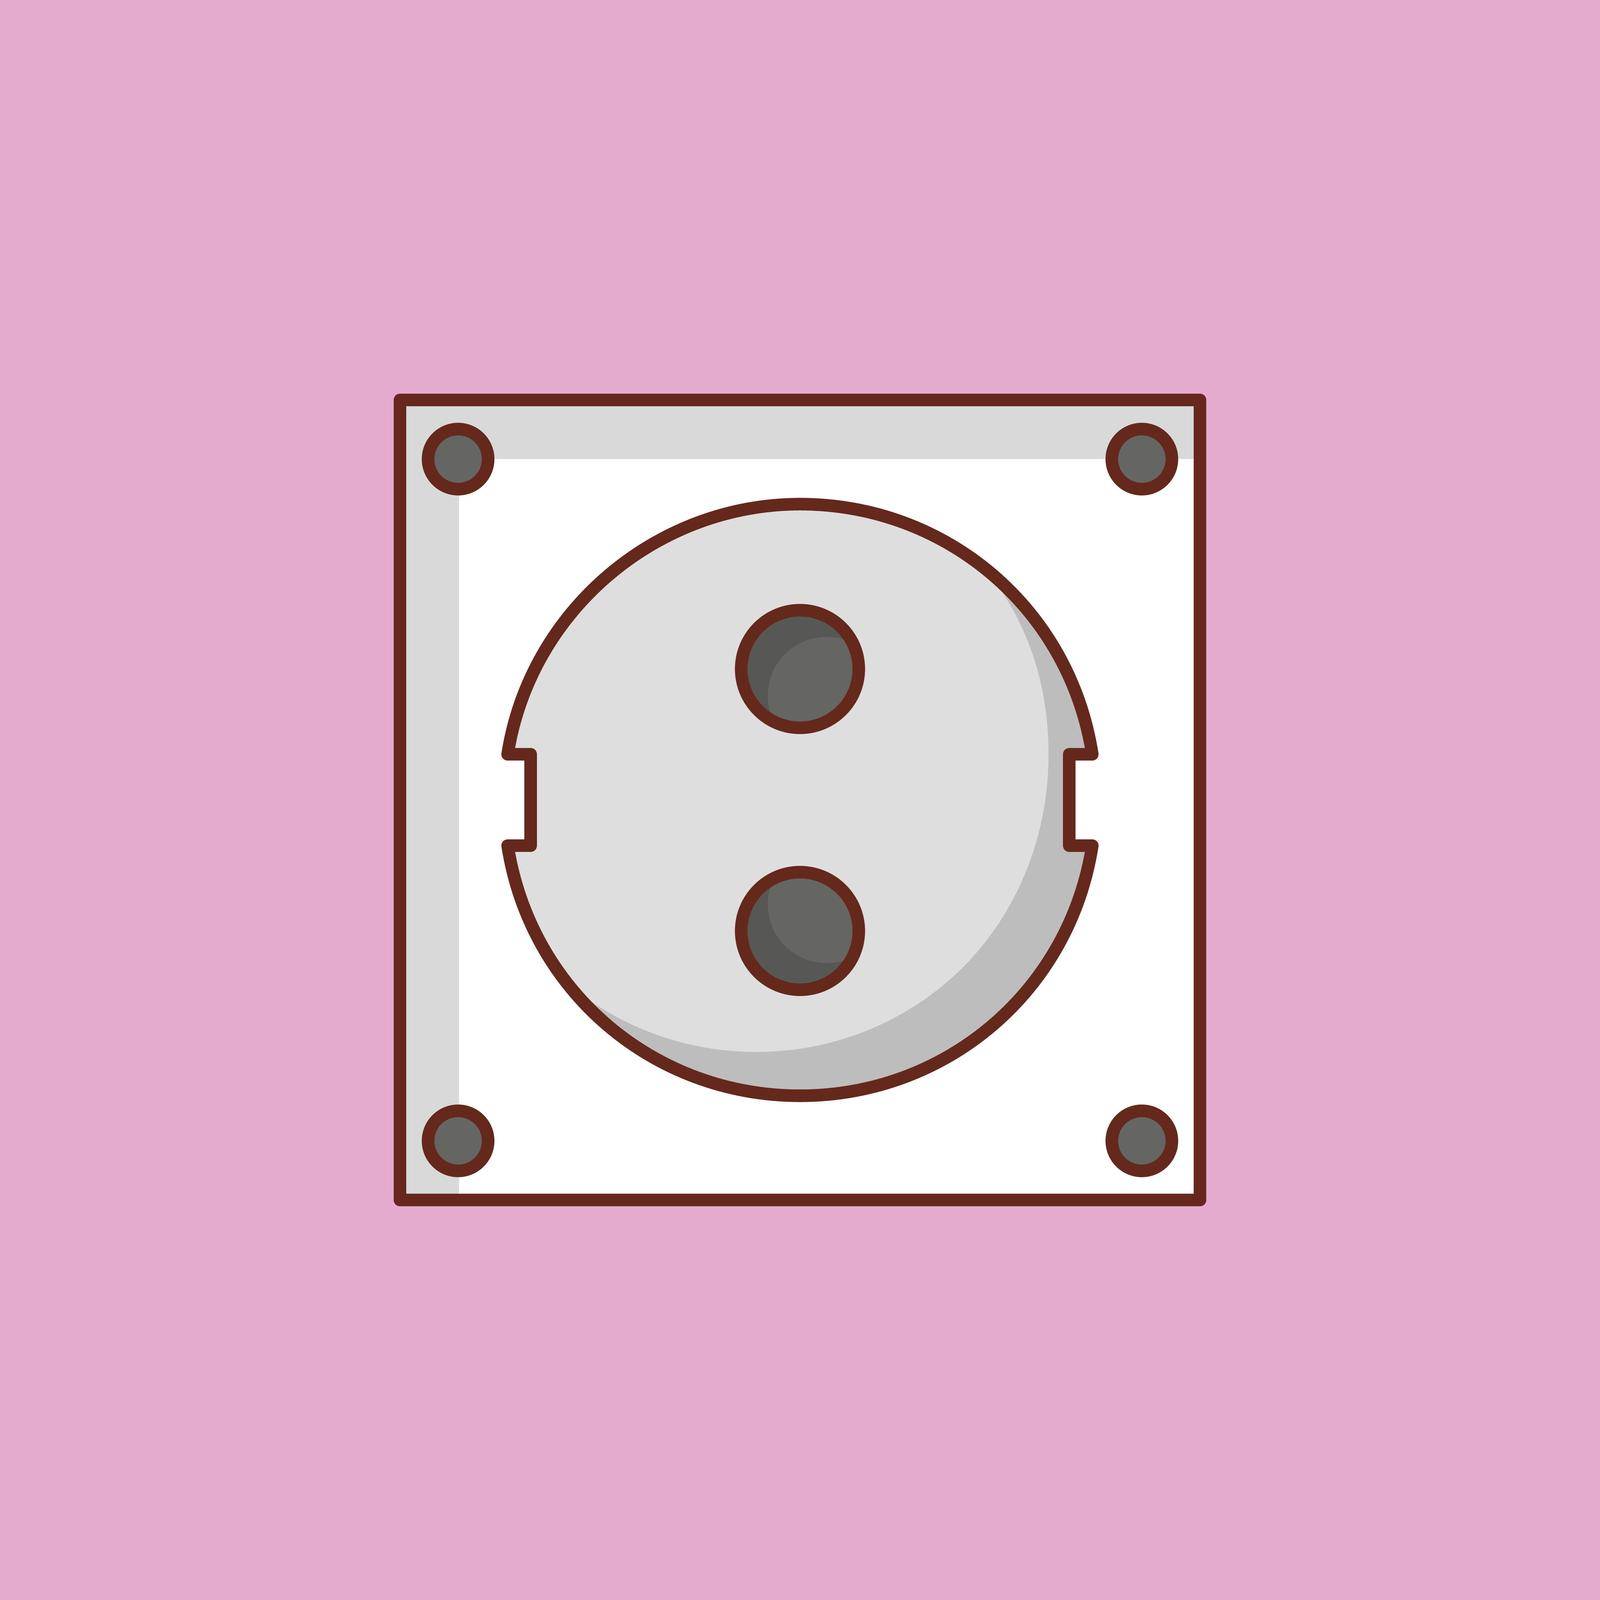 socket Vector illustration on a transparent background. Premium quality symbols. Vector Line Flat color icon for concept and graphic design.